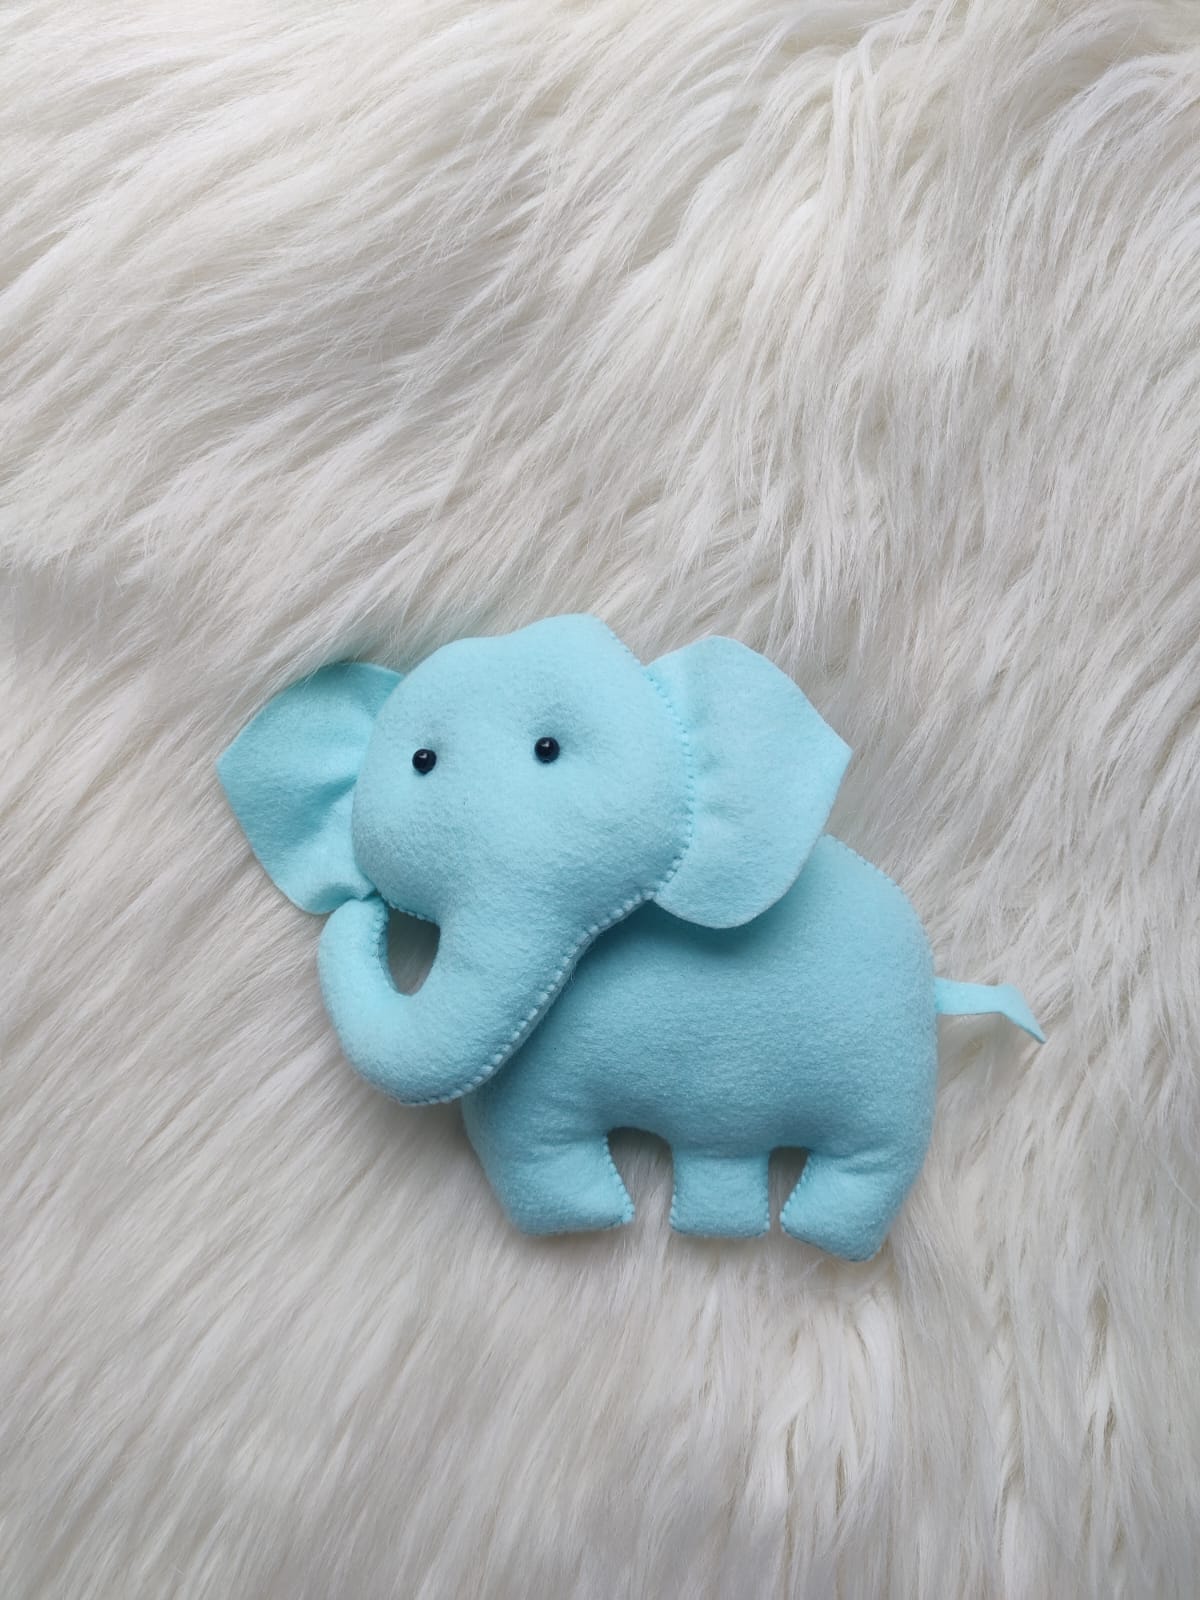 Cute and Cuddly Felt Blue Elephant: Soft Plush Toys for Toddlers Kids (PREPAID ORDER)